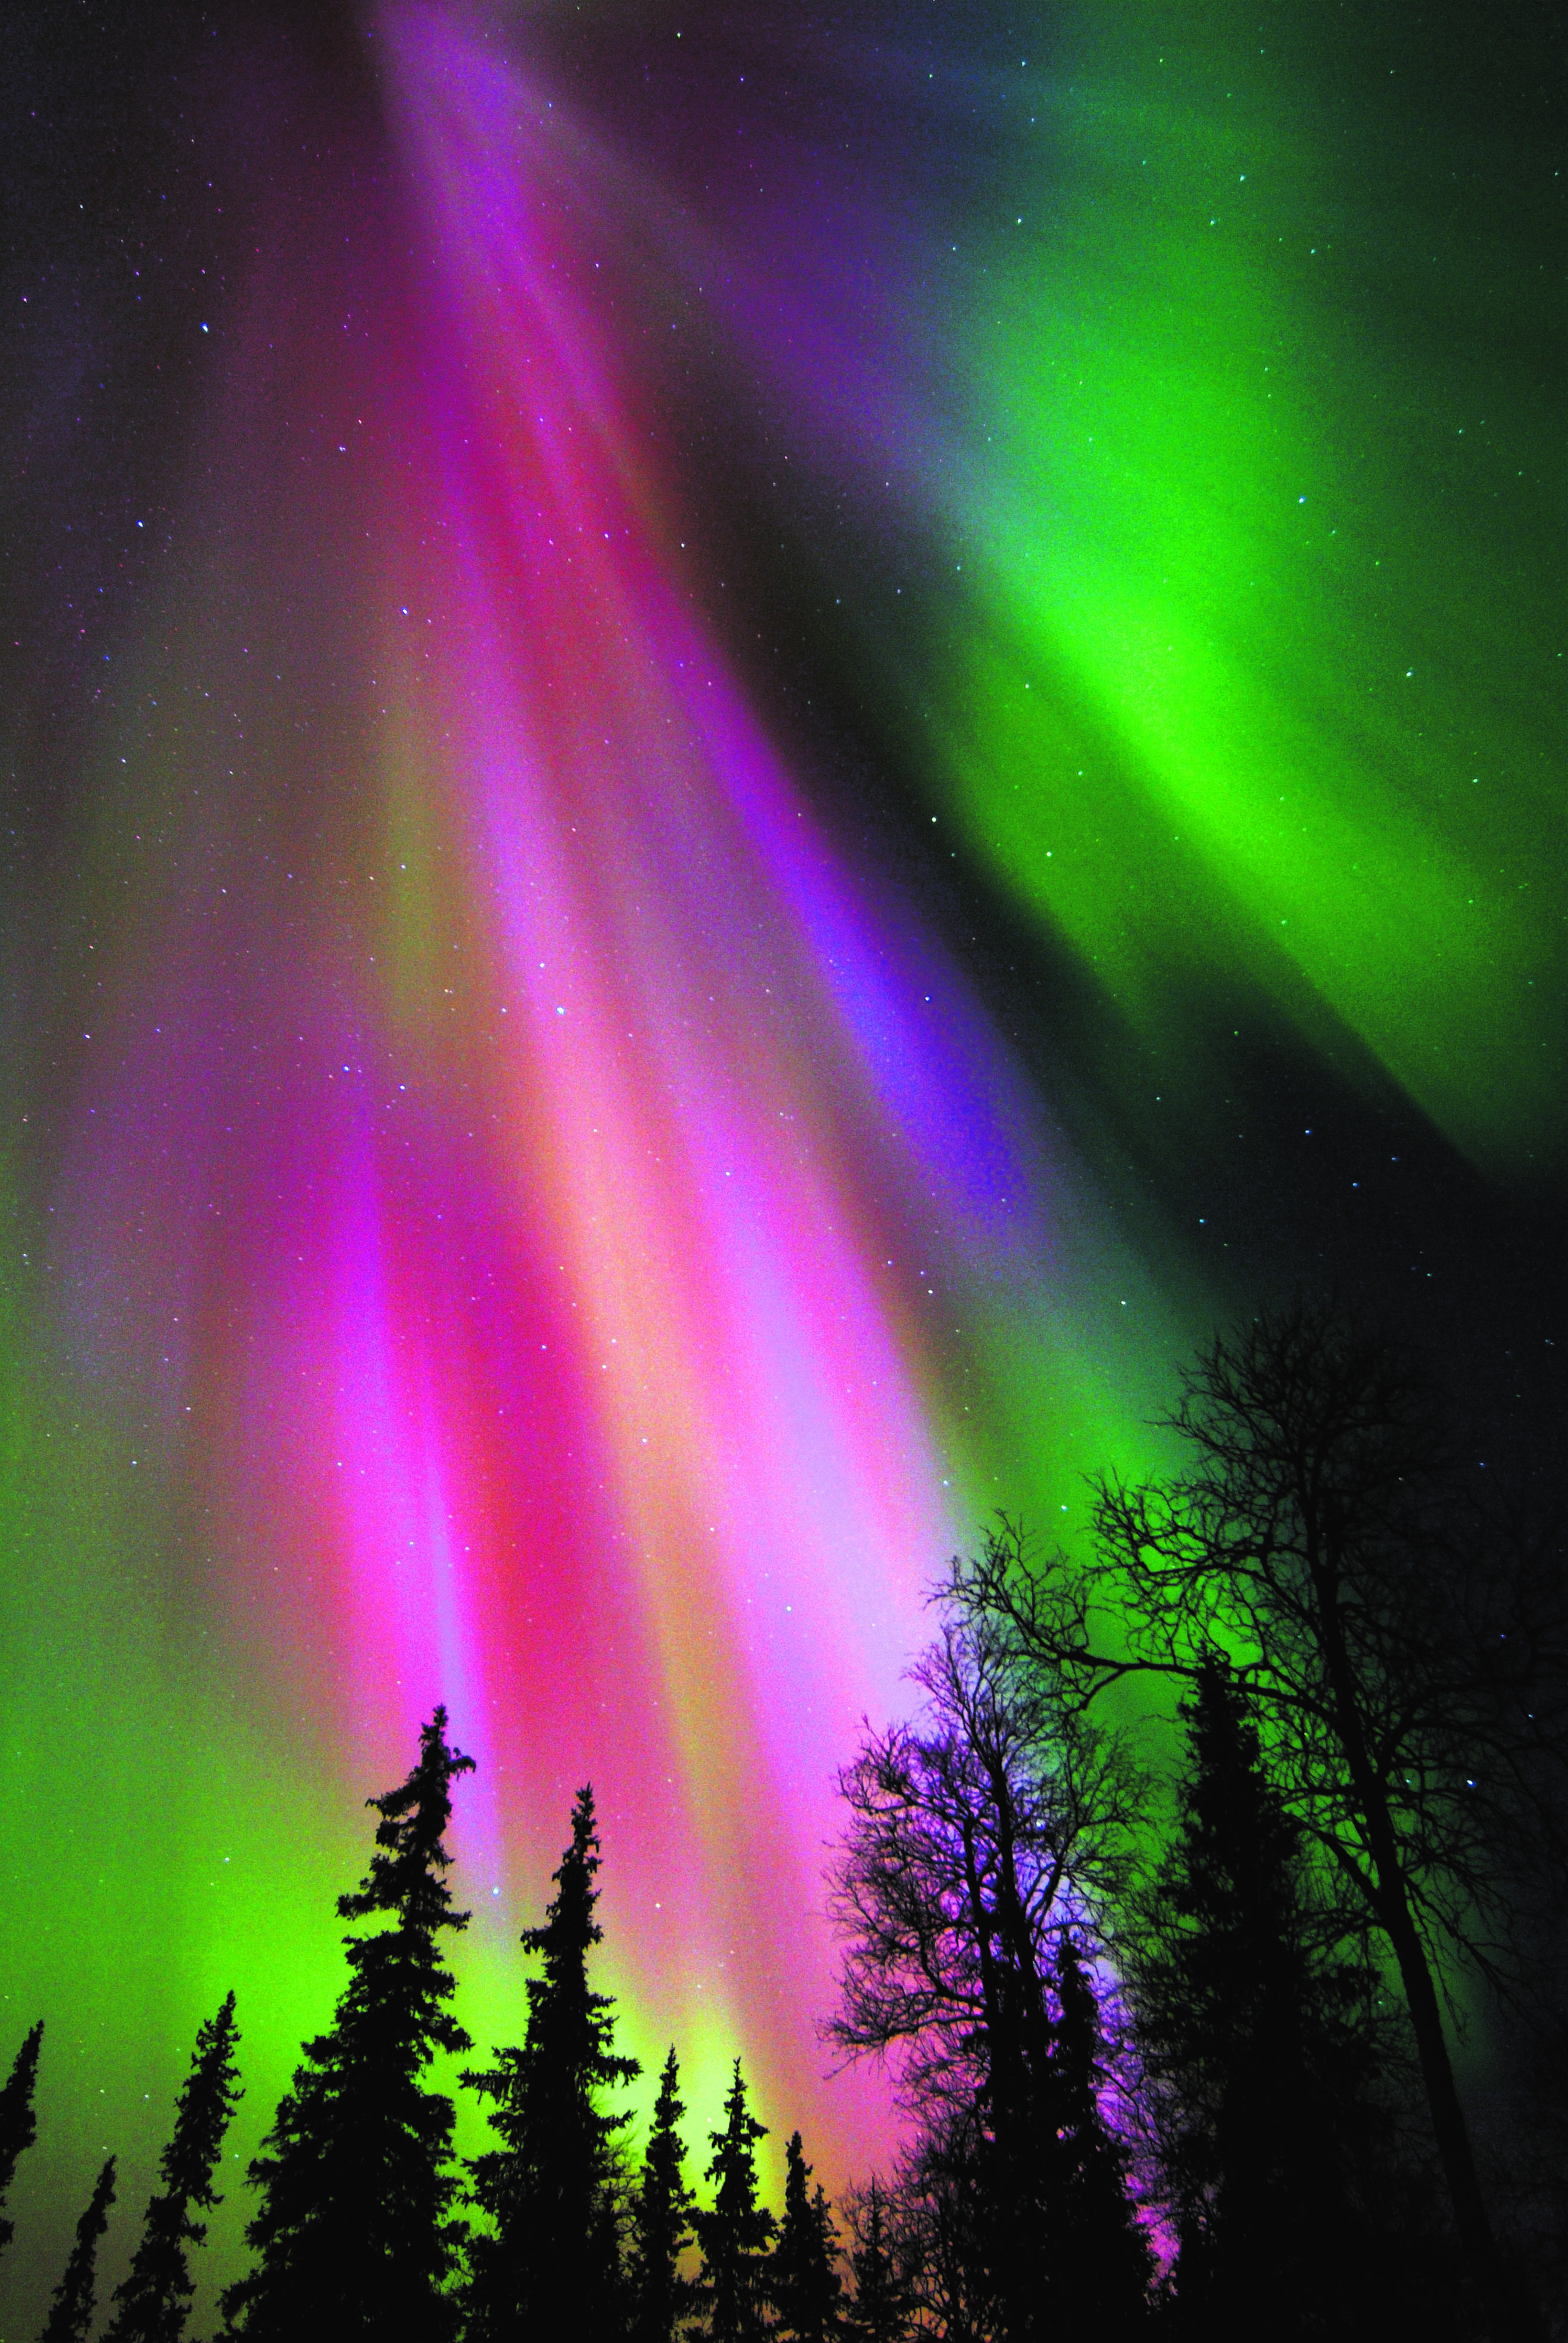 Colourful northern lights in a nightsky